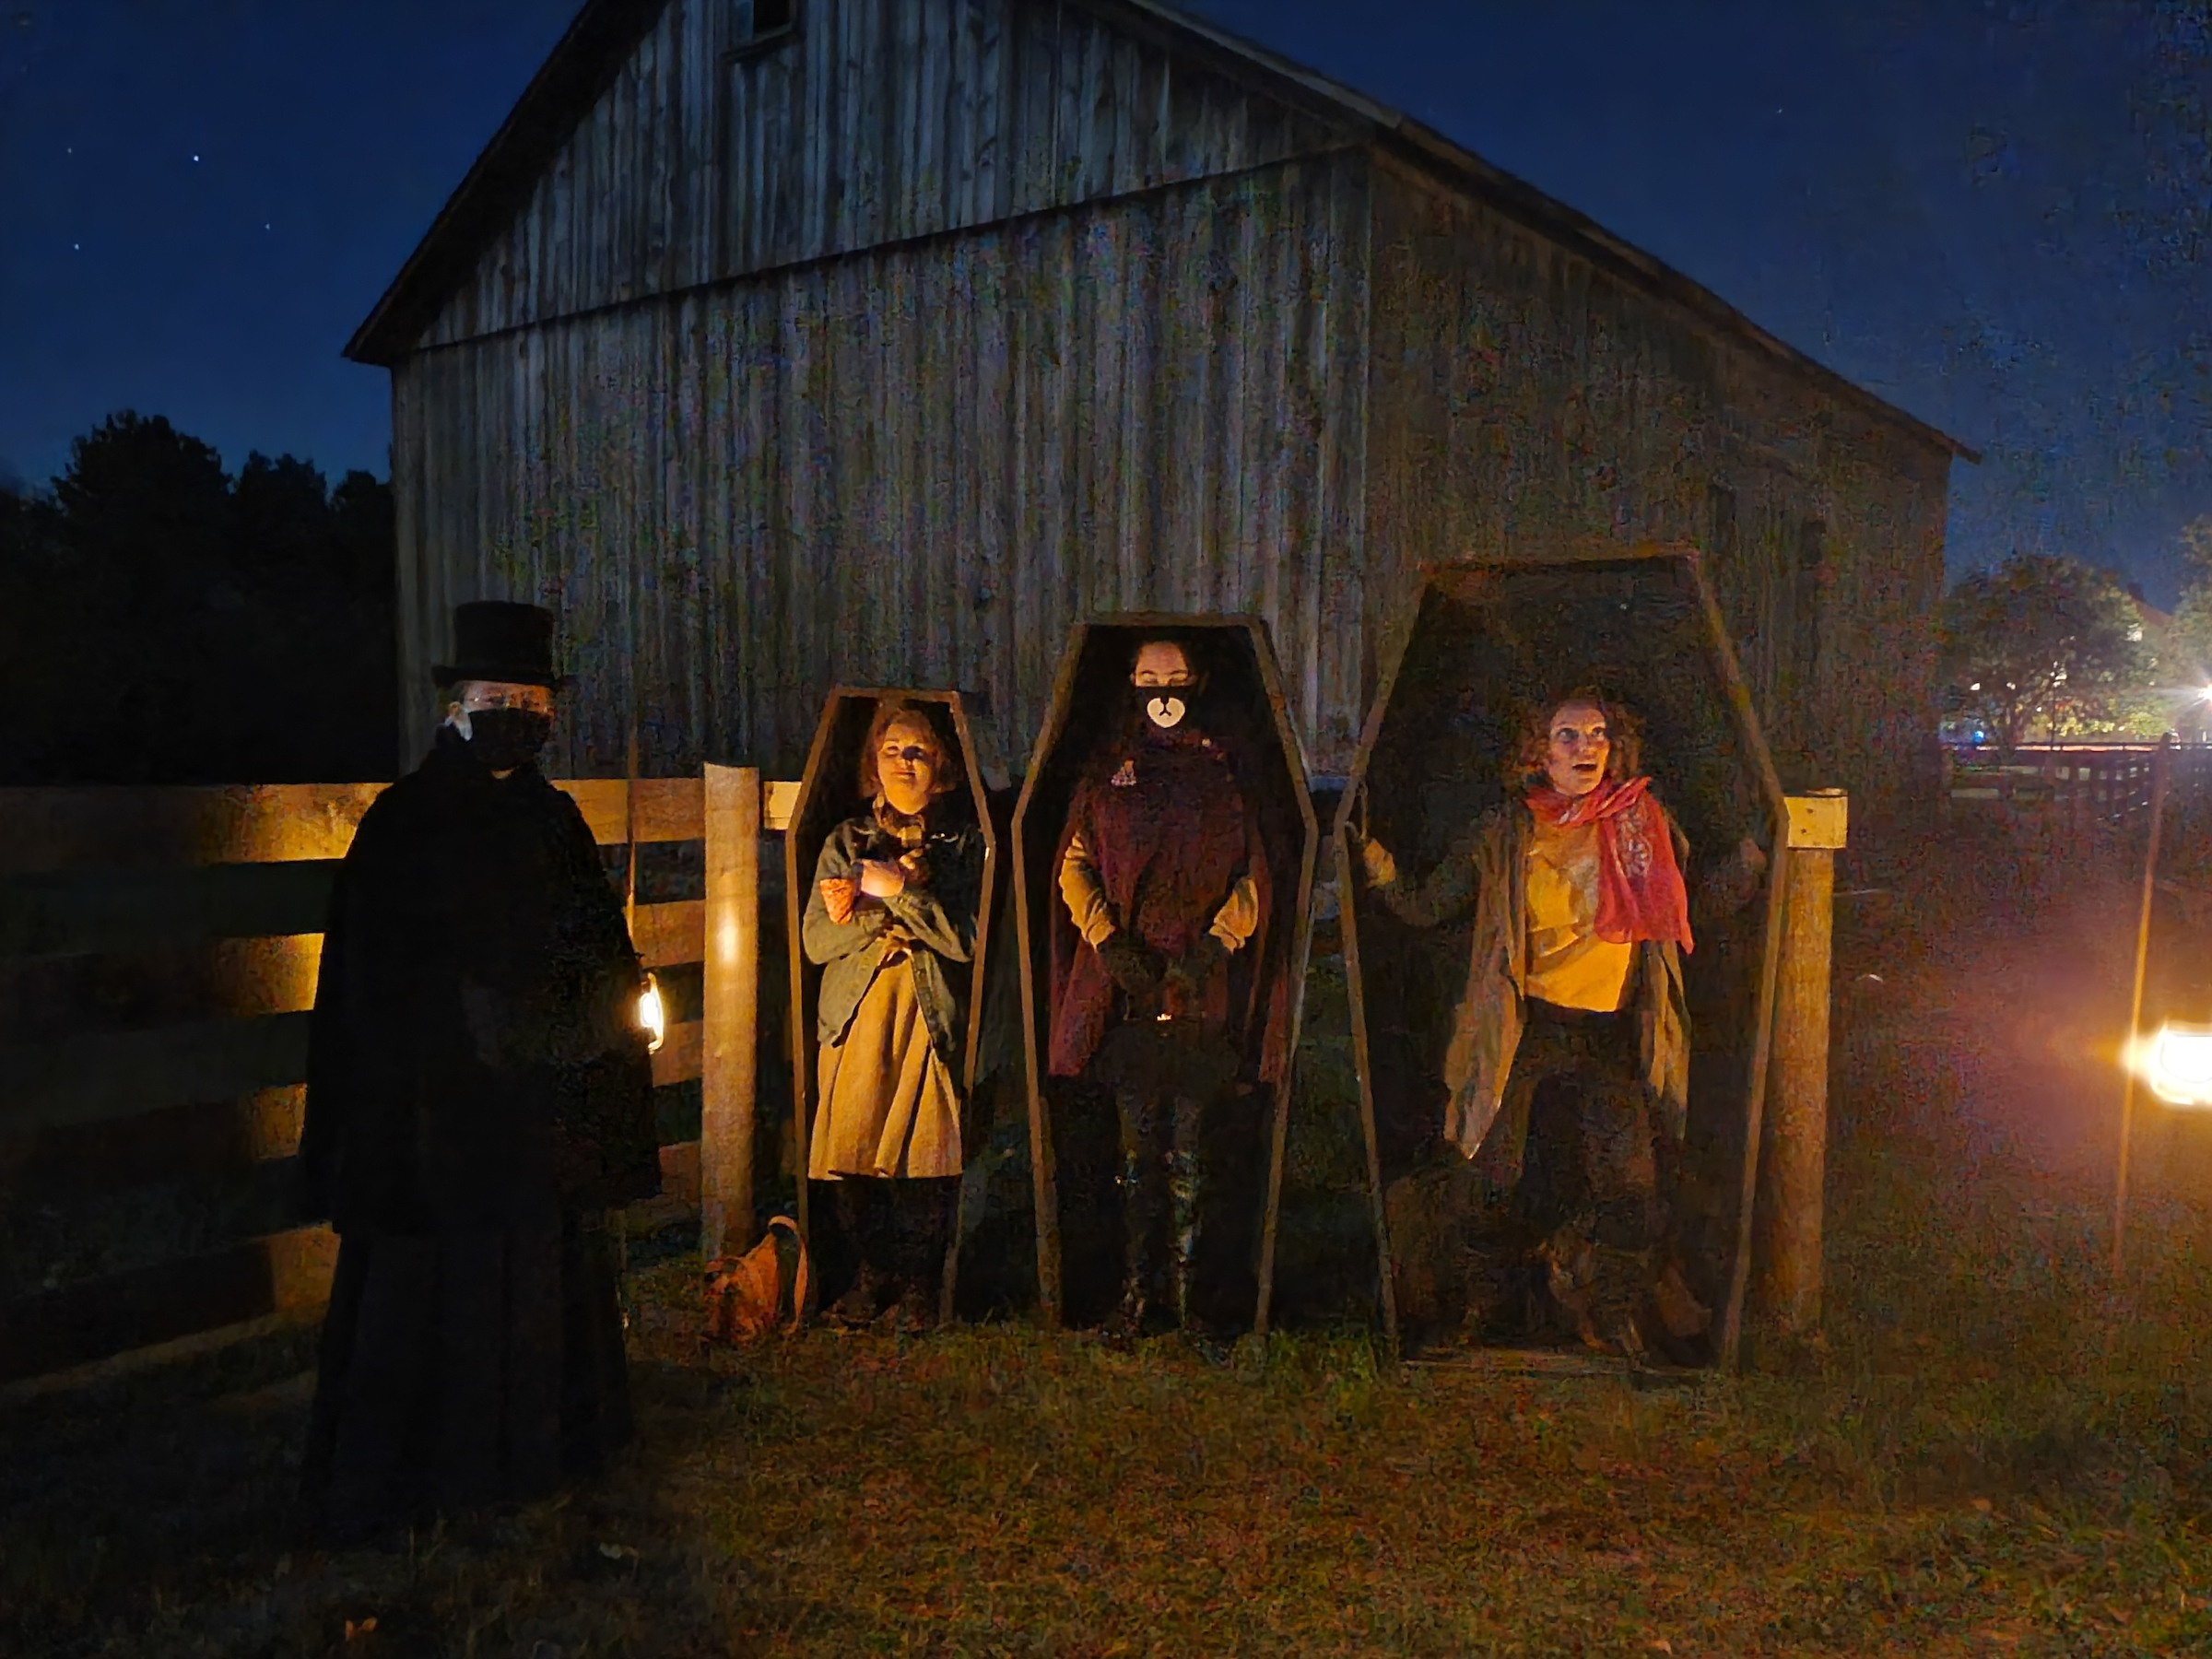 Three people, in costumes, standing in coffins outside during the night, with a person dressed in all black beside them